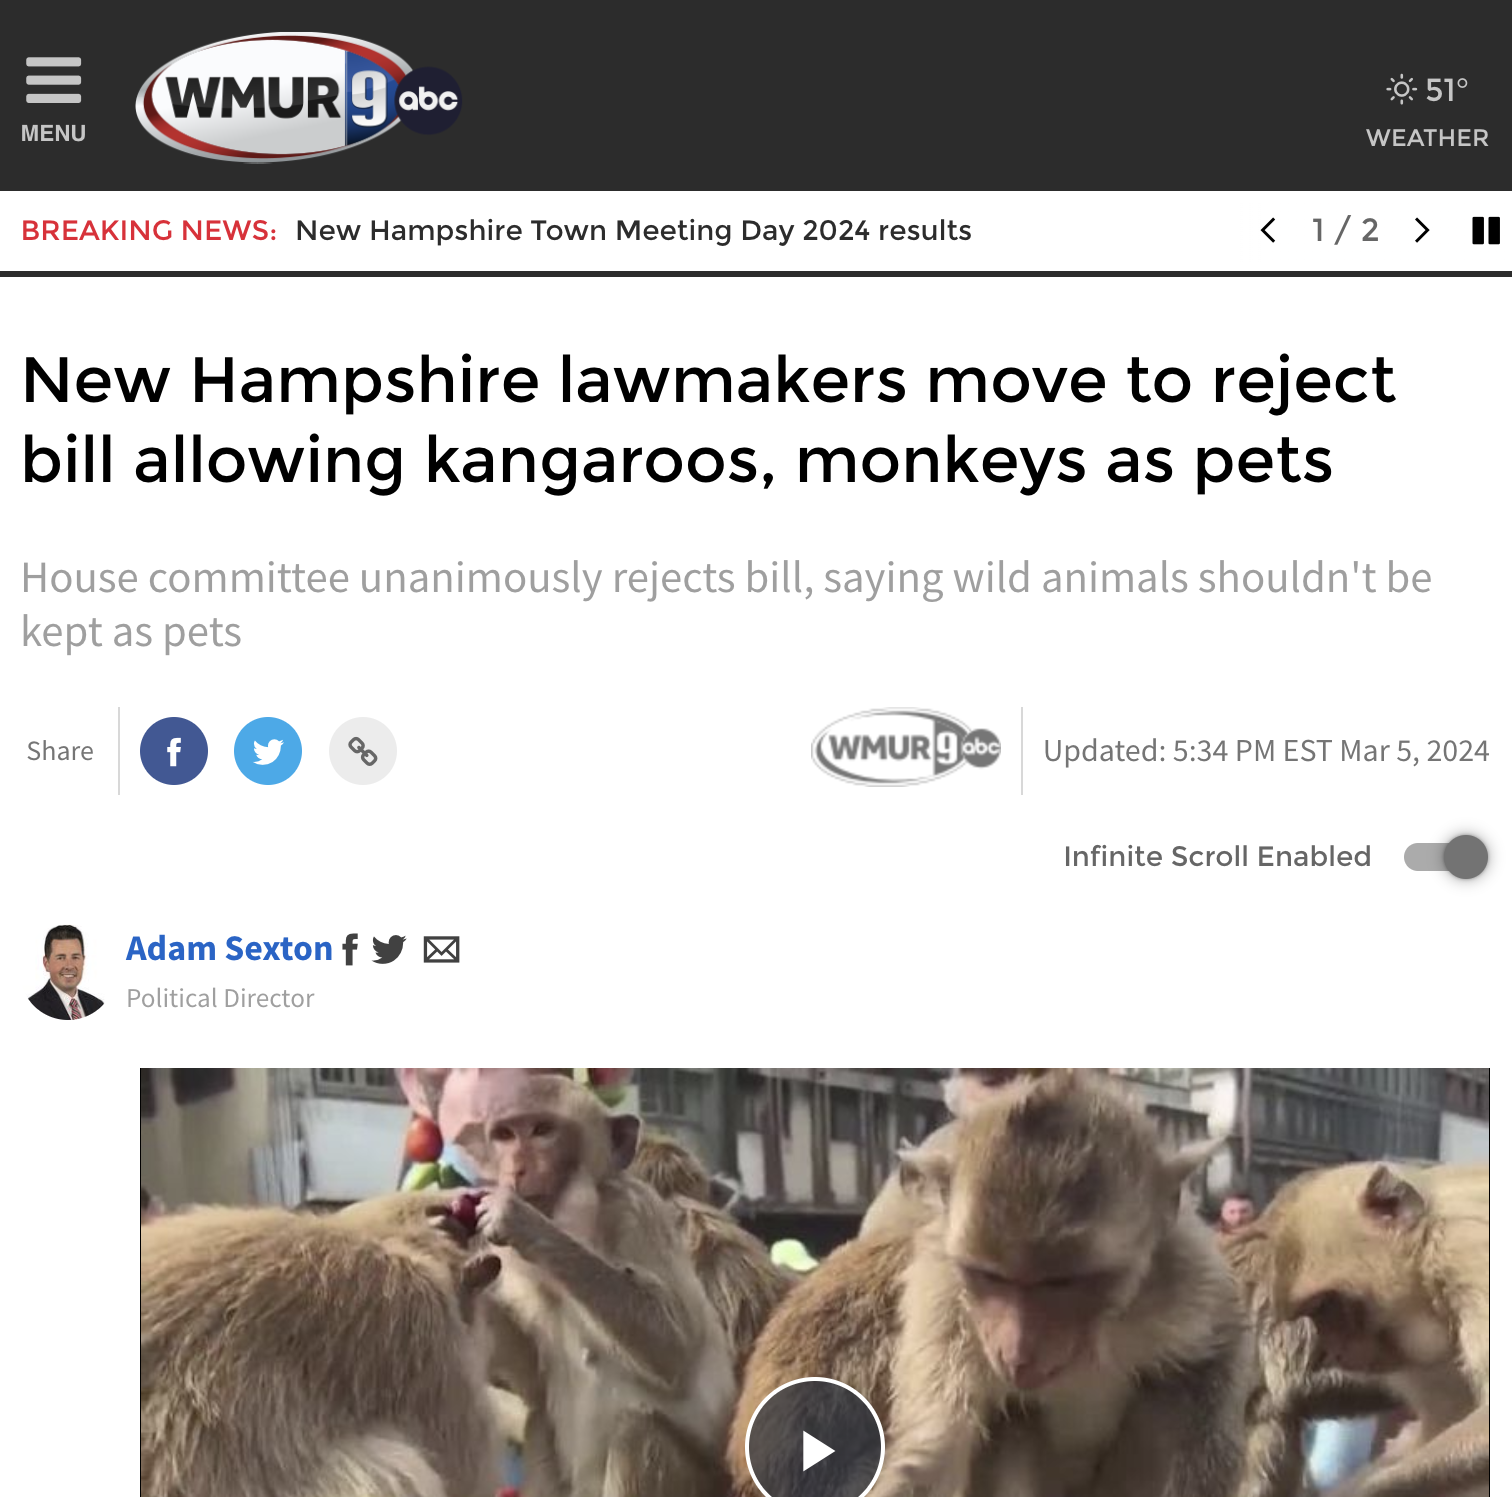 rhesus macaque - Menu WMUR9abc Breaking News New Hampshire Town Meeting Day 2024 results 51 Weather  I New Hampshire lawmakers move to reject bill allowing kangaroos, monkeys as pets House committee unanimously rejects bill, saying wild animals shouldn't 